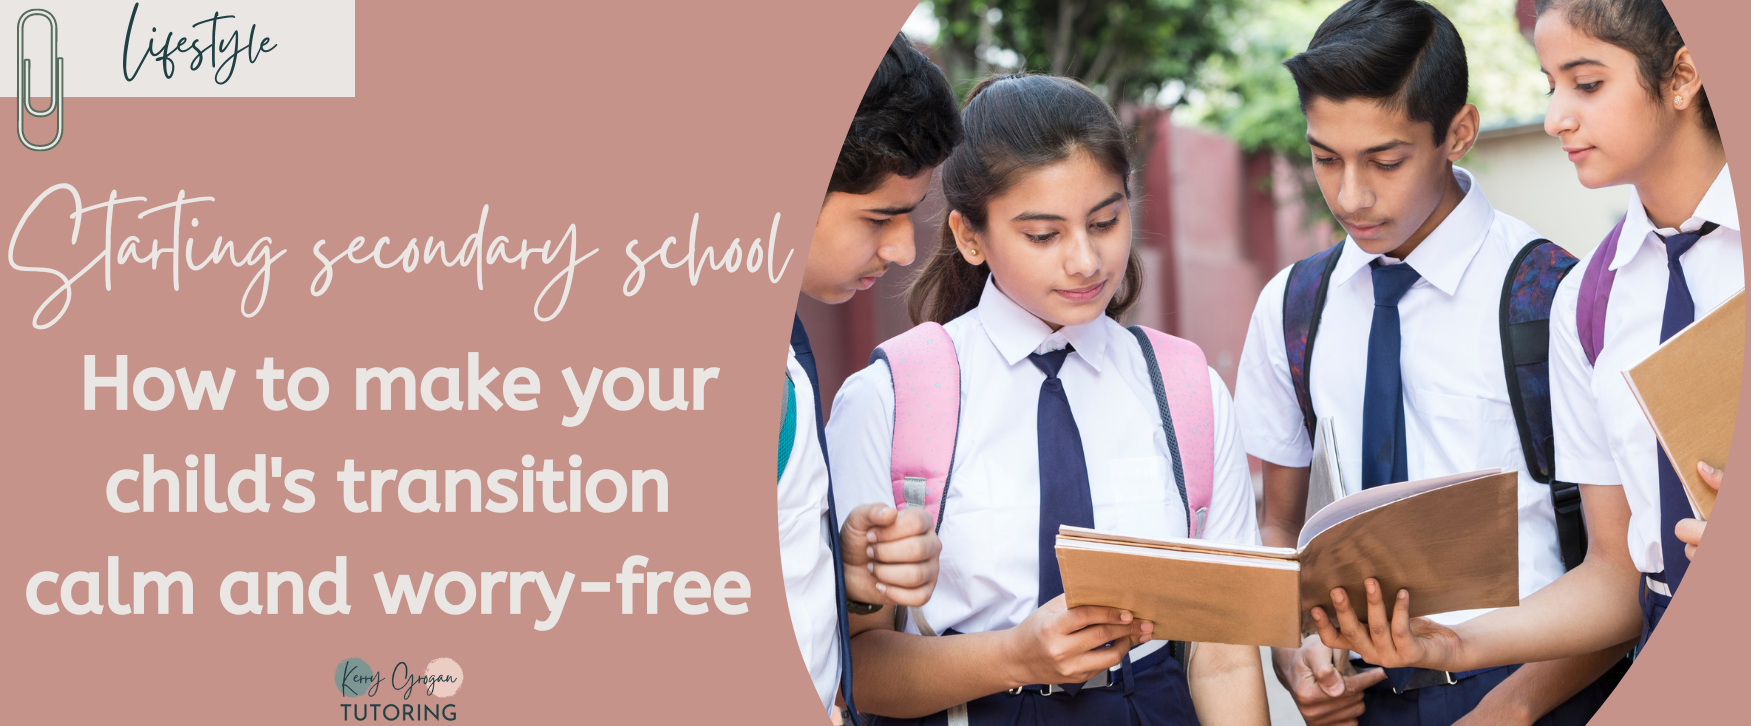 Starting secondary school: How to make your child's transition calm and worry-free